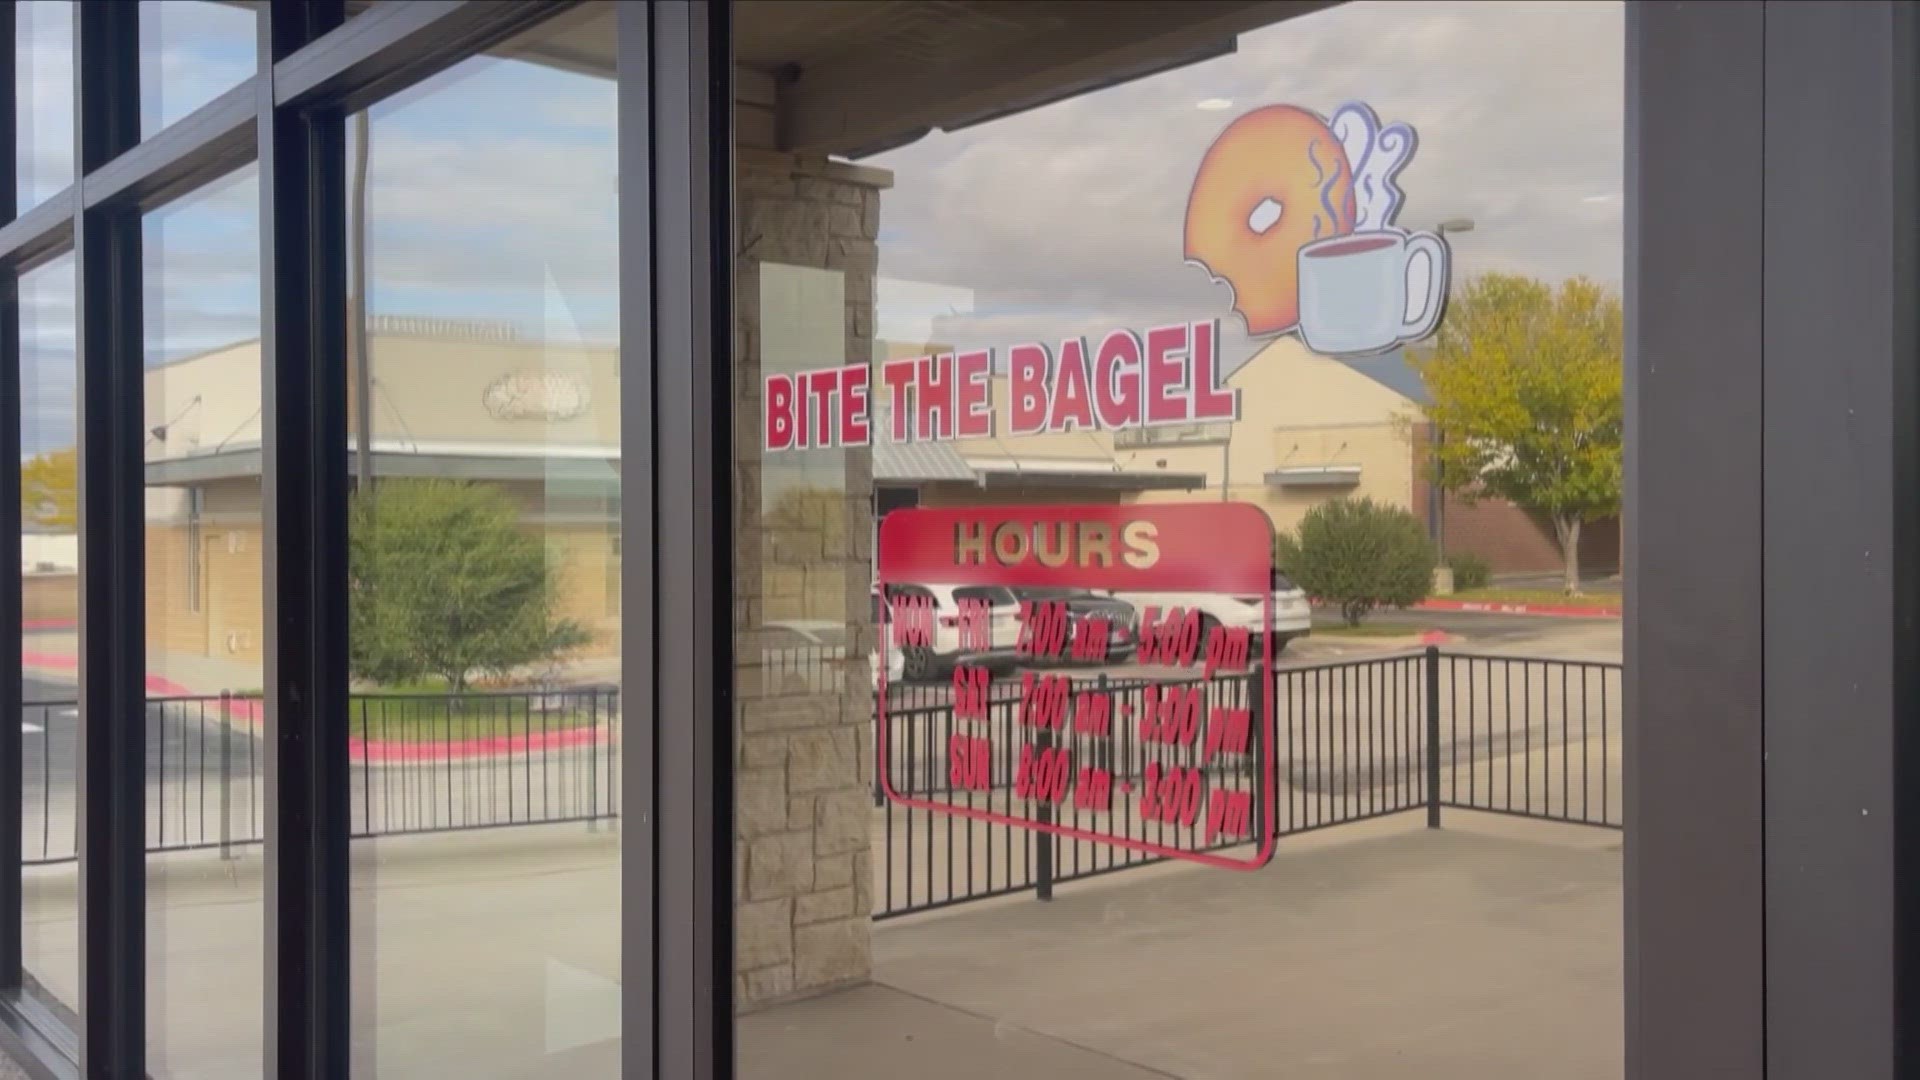 Bite the Bagel has been a staple in Killeen for over a decade, garnering community support and recognition.